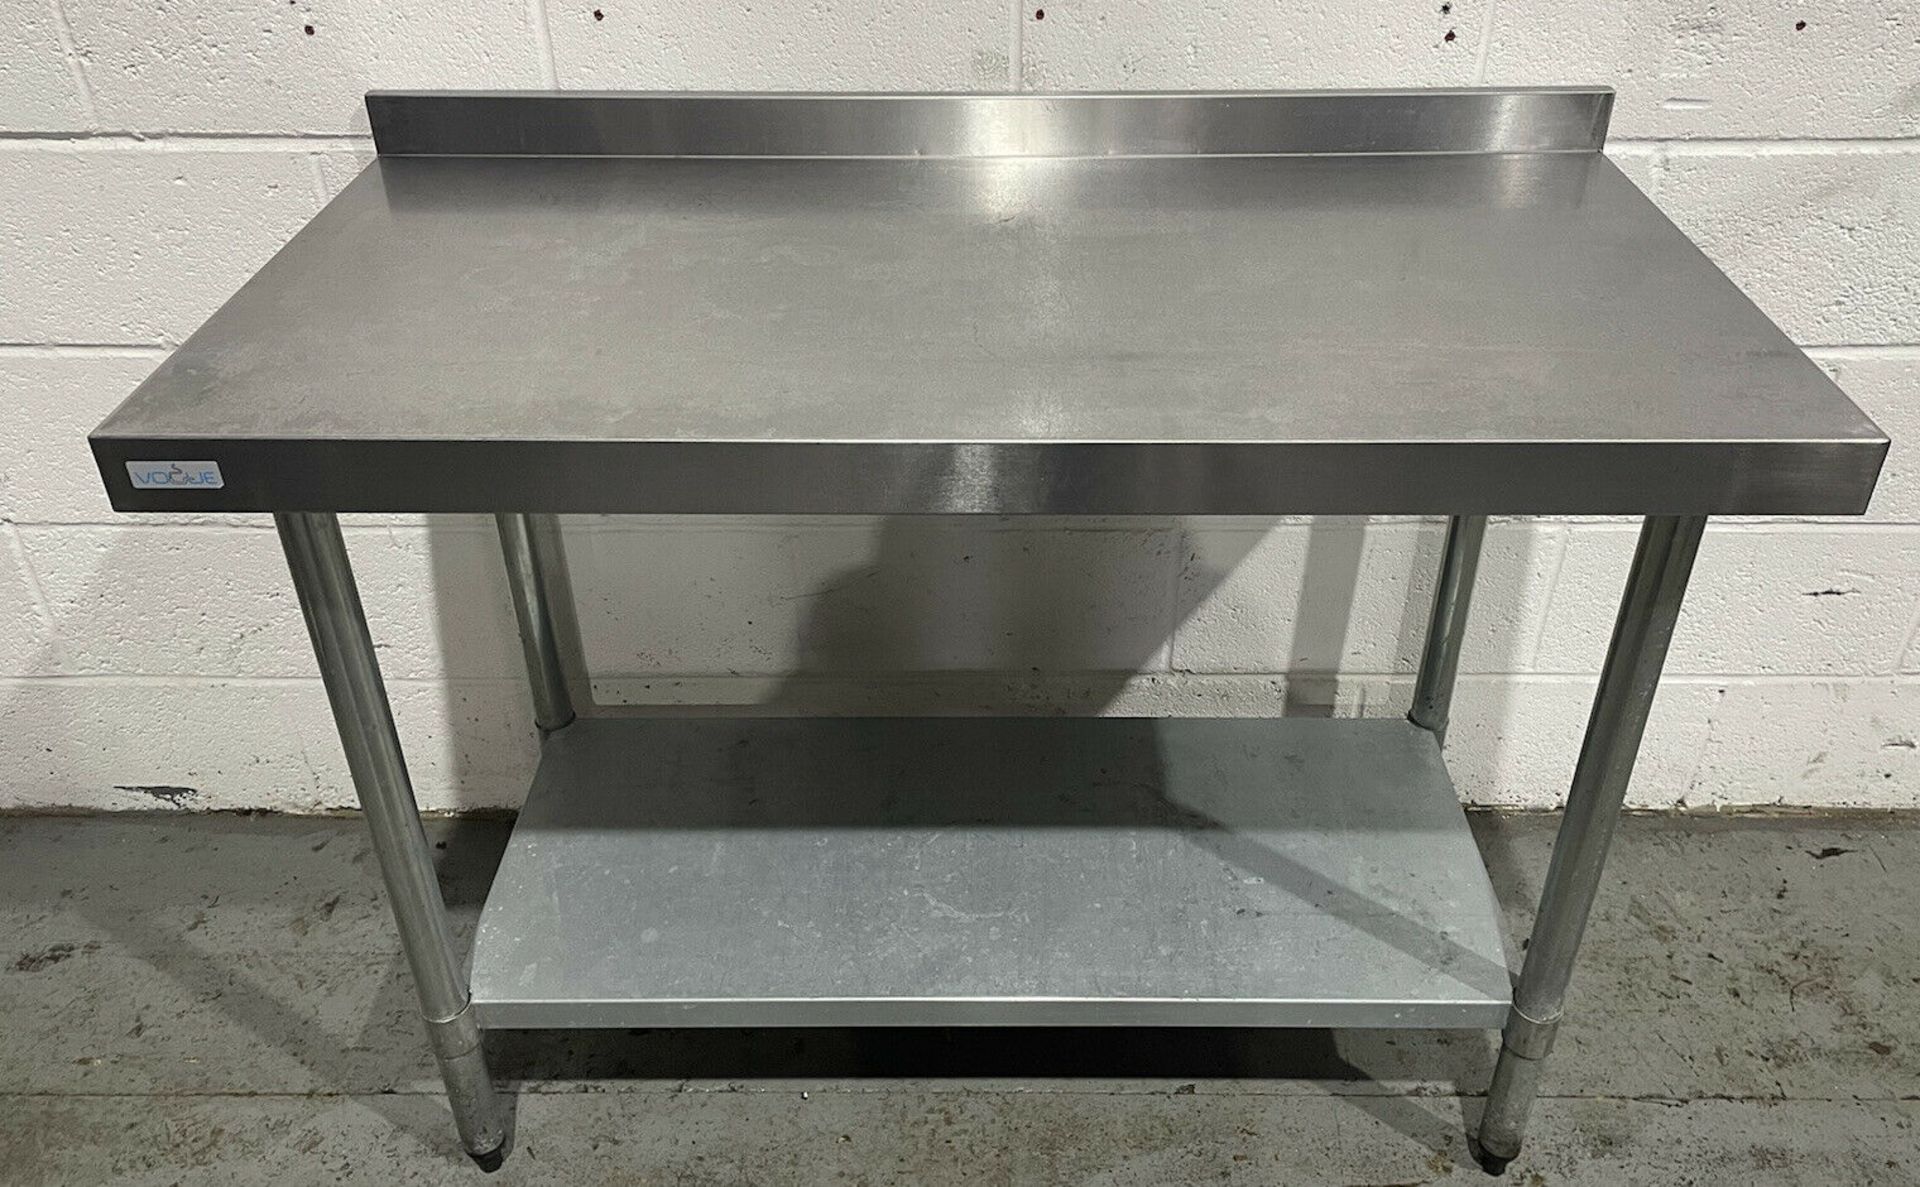 Stainless steel preperation table with upstand and